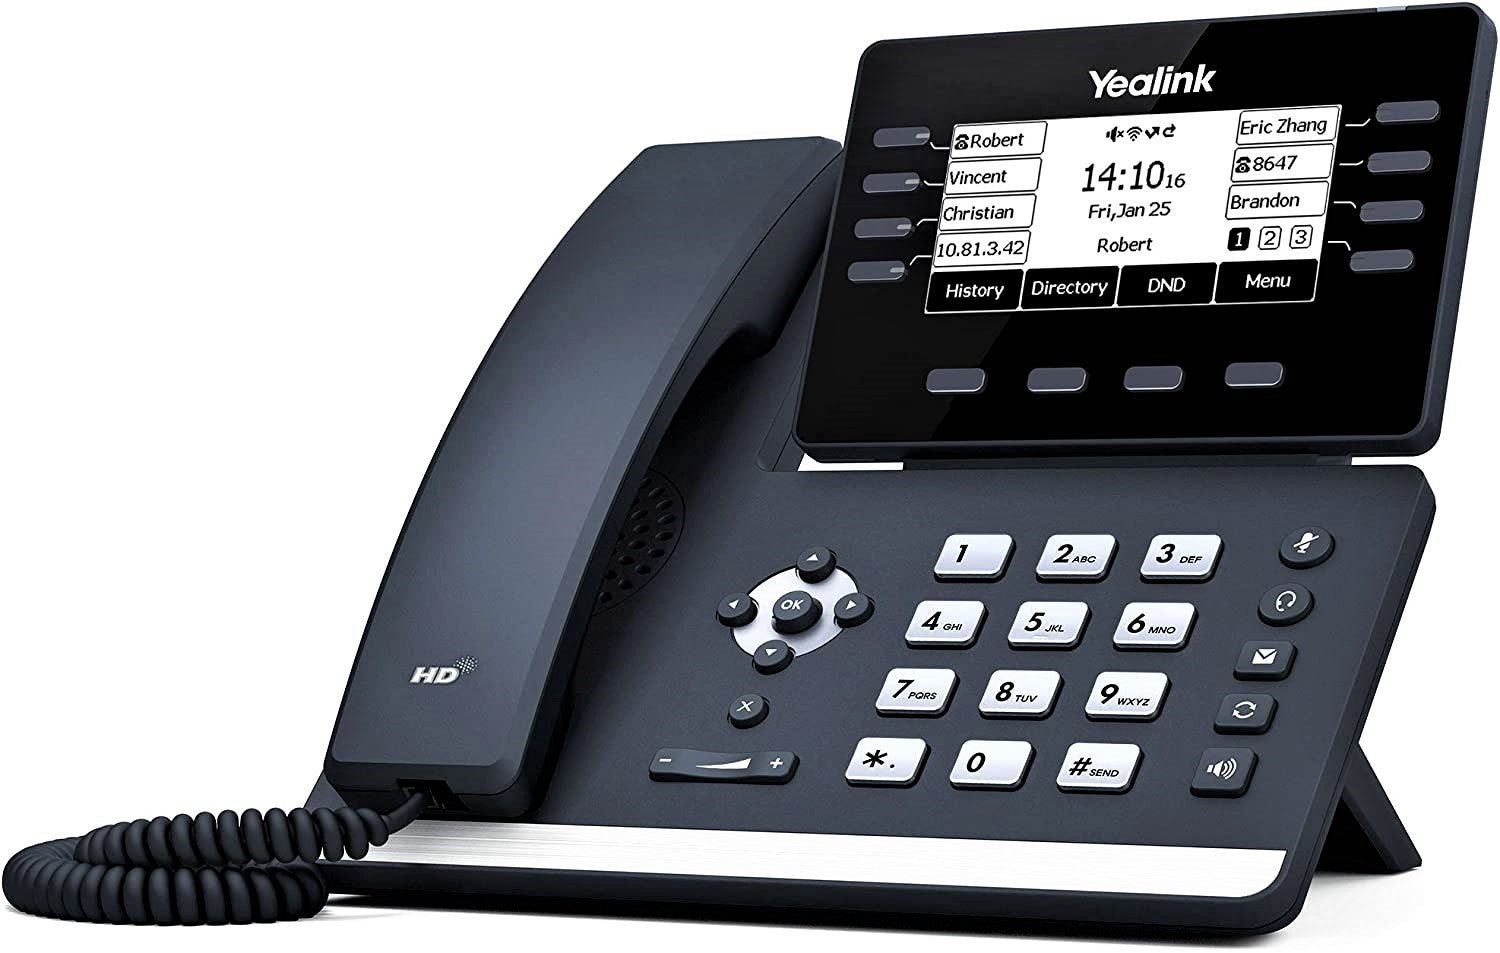 Yealink T53 IP Phone, 12 VoIP Accounts. 3.7-Inch Graphical Display. USB 2.0, Dual-Port Gigabit Ethernet, 802.3af PoE, Power Adapter Not Included (SIP-T53)